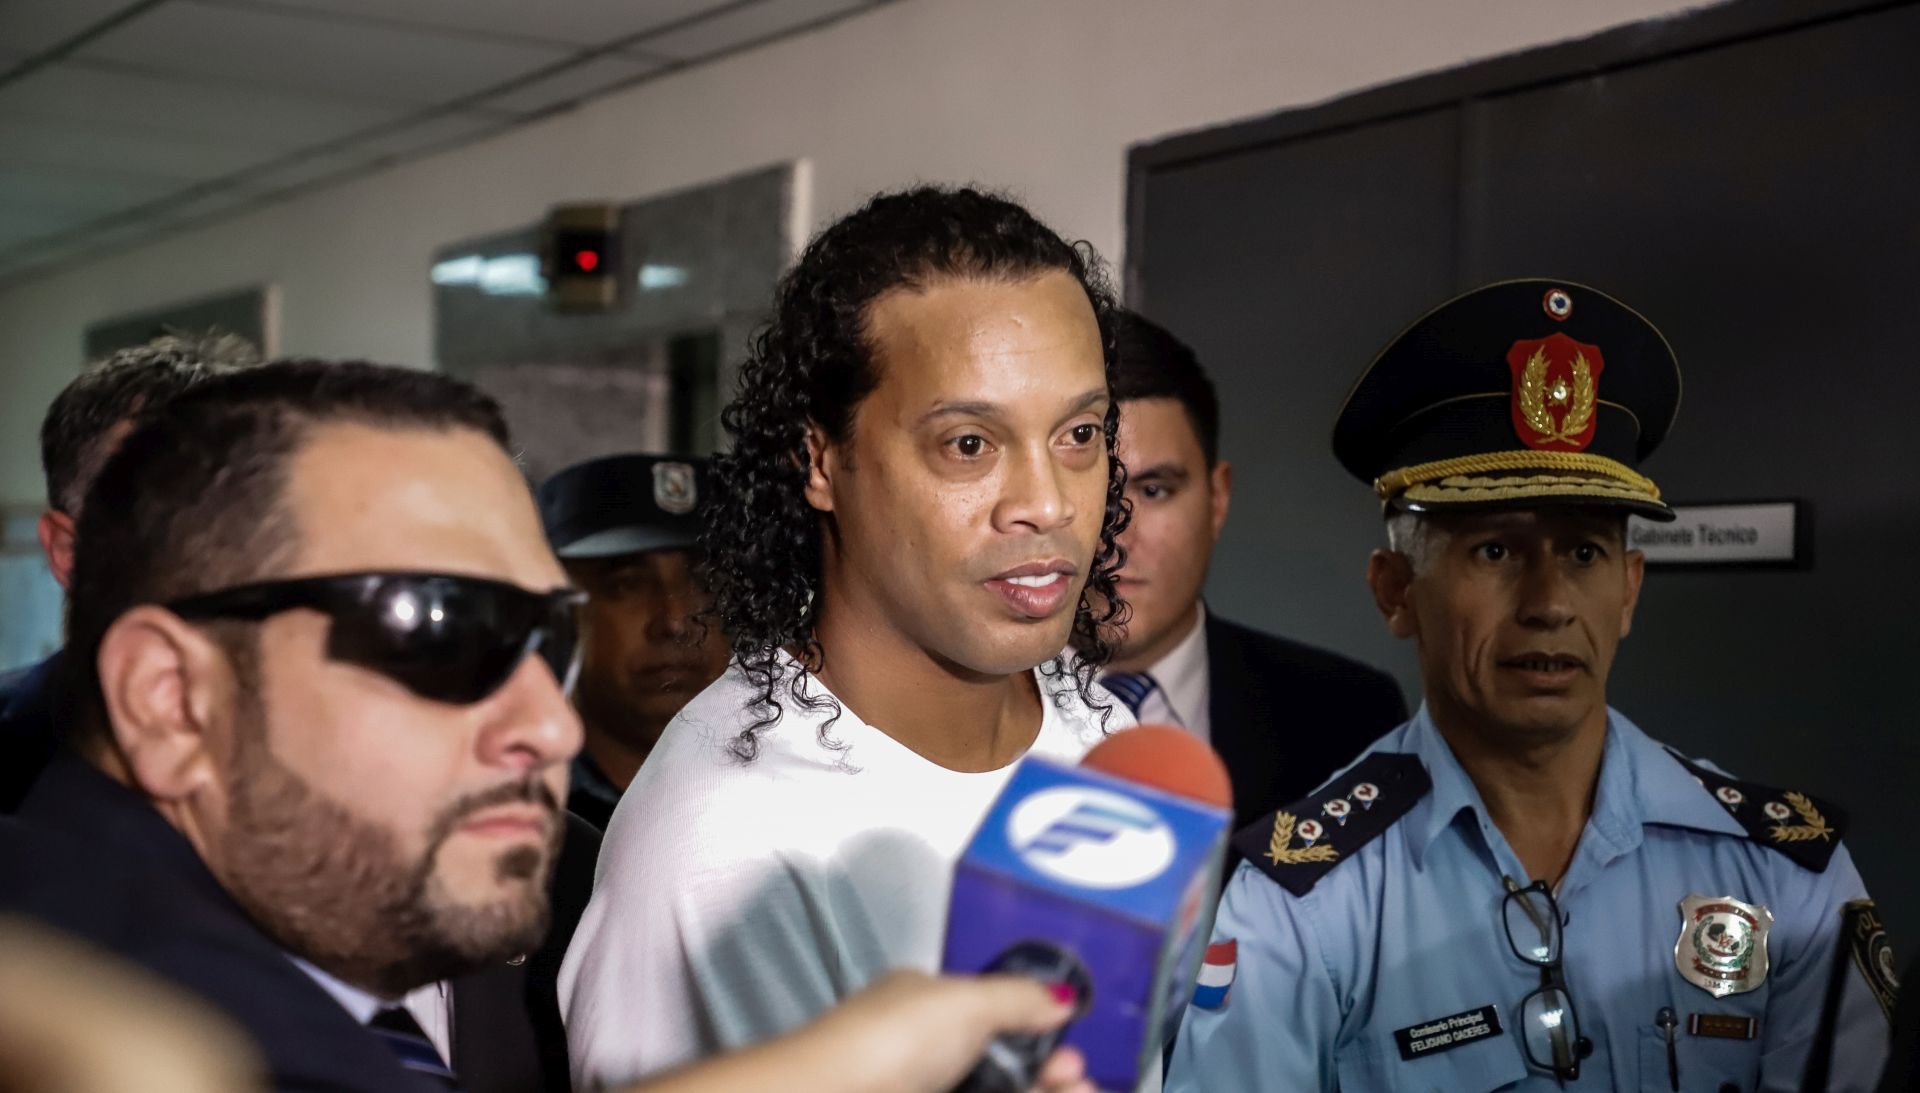 epa08275164 Ronaldo de Assis Moreira, a.k.a. Ronaldinho (C), arrives at the Palace of Justice to appear before Judge Mirko Valinotti, in Asuncion, Paraguay, 06 March 2020. Brazil's former international Ronaldinho Gaucho and his brother Roberto appeared on 06 March before the judge that will decide if they benefit from a procedural exit that separates them from the open cause after entering Paraguay with false passports. The appeal to this 'abbreviated procedural exit' was granted on 05 March by the Prosecutor's Office to the two brothers and it was because both contributed 'relevant data' to the investigation, as explained by the prosecutor of the case, Federico Delfino.  EPA/NATHALIA AGUILAR